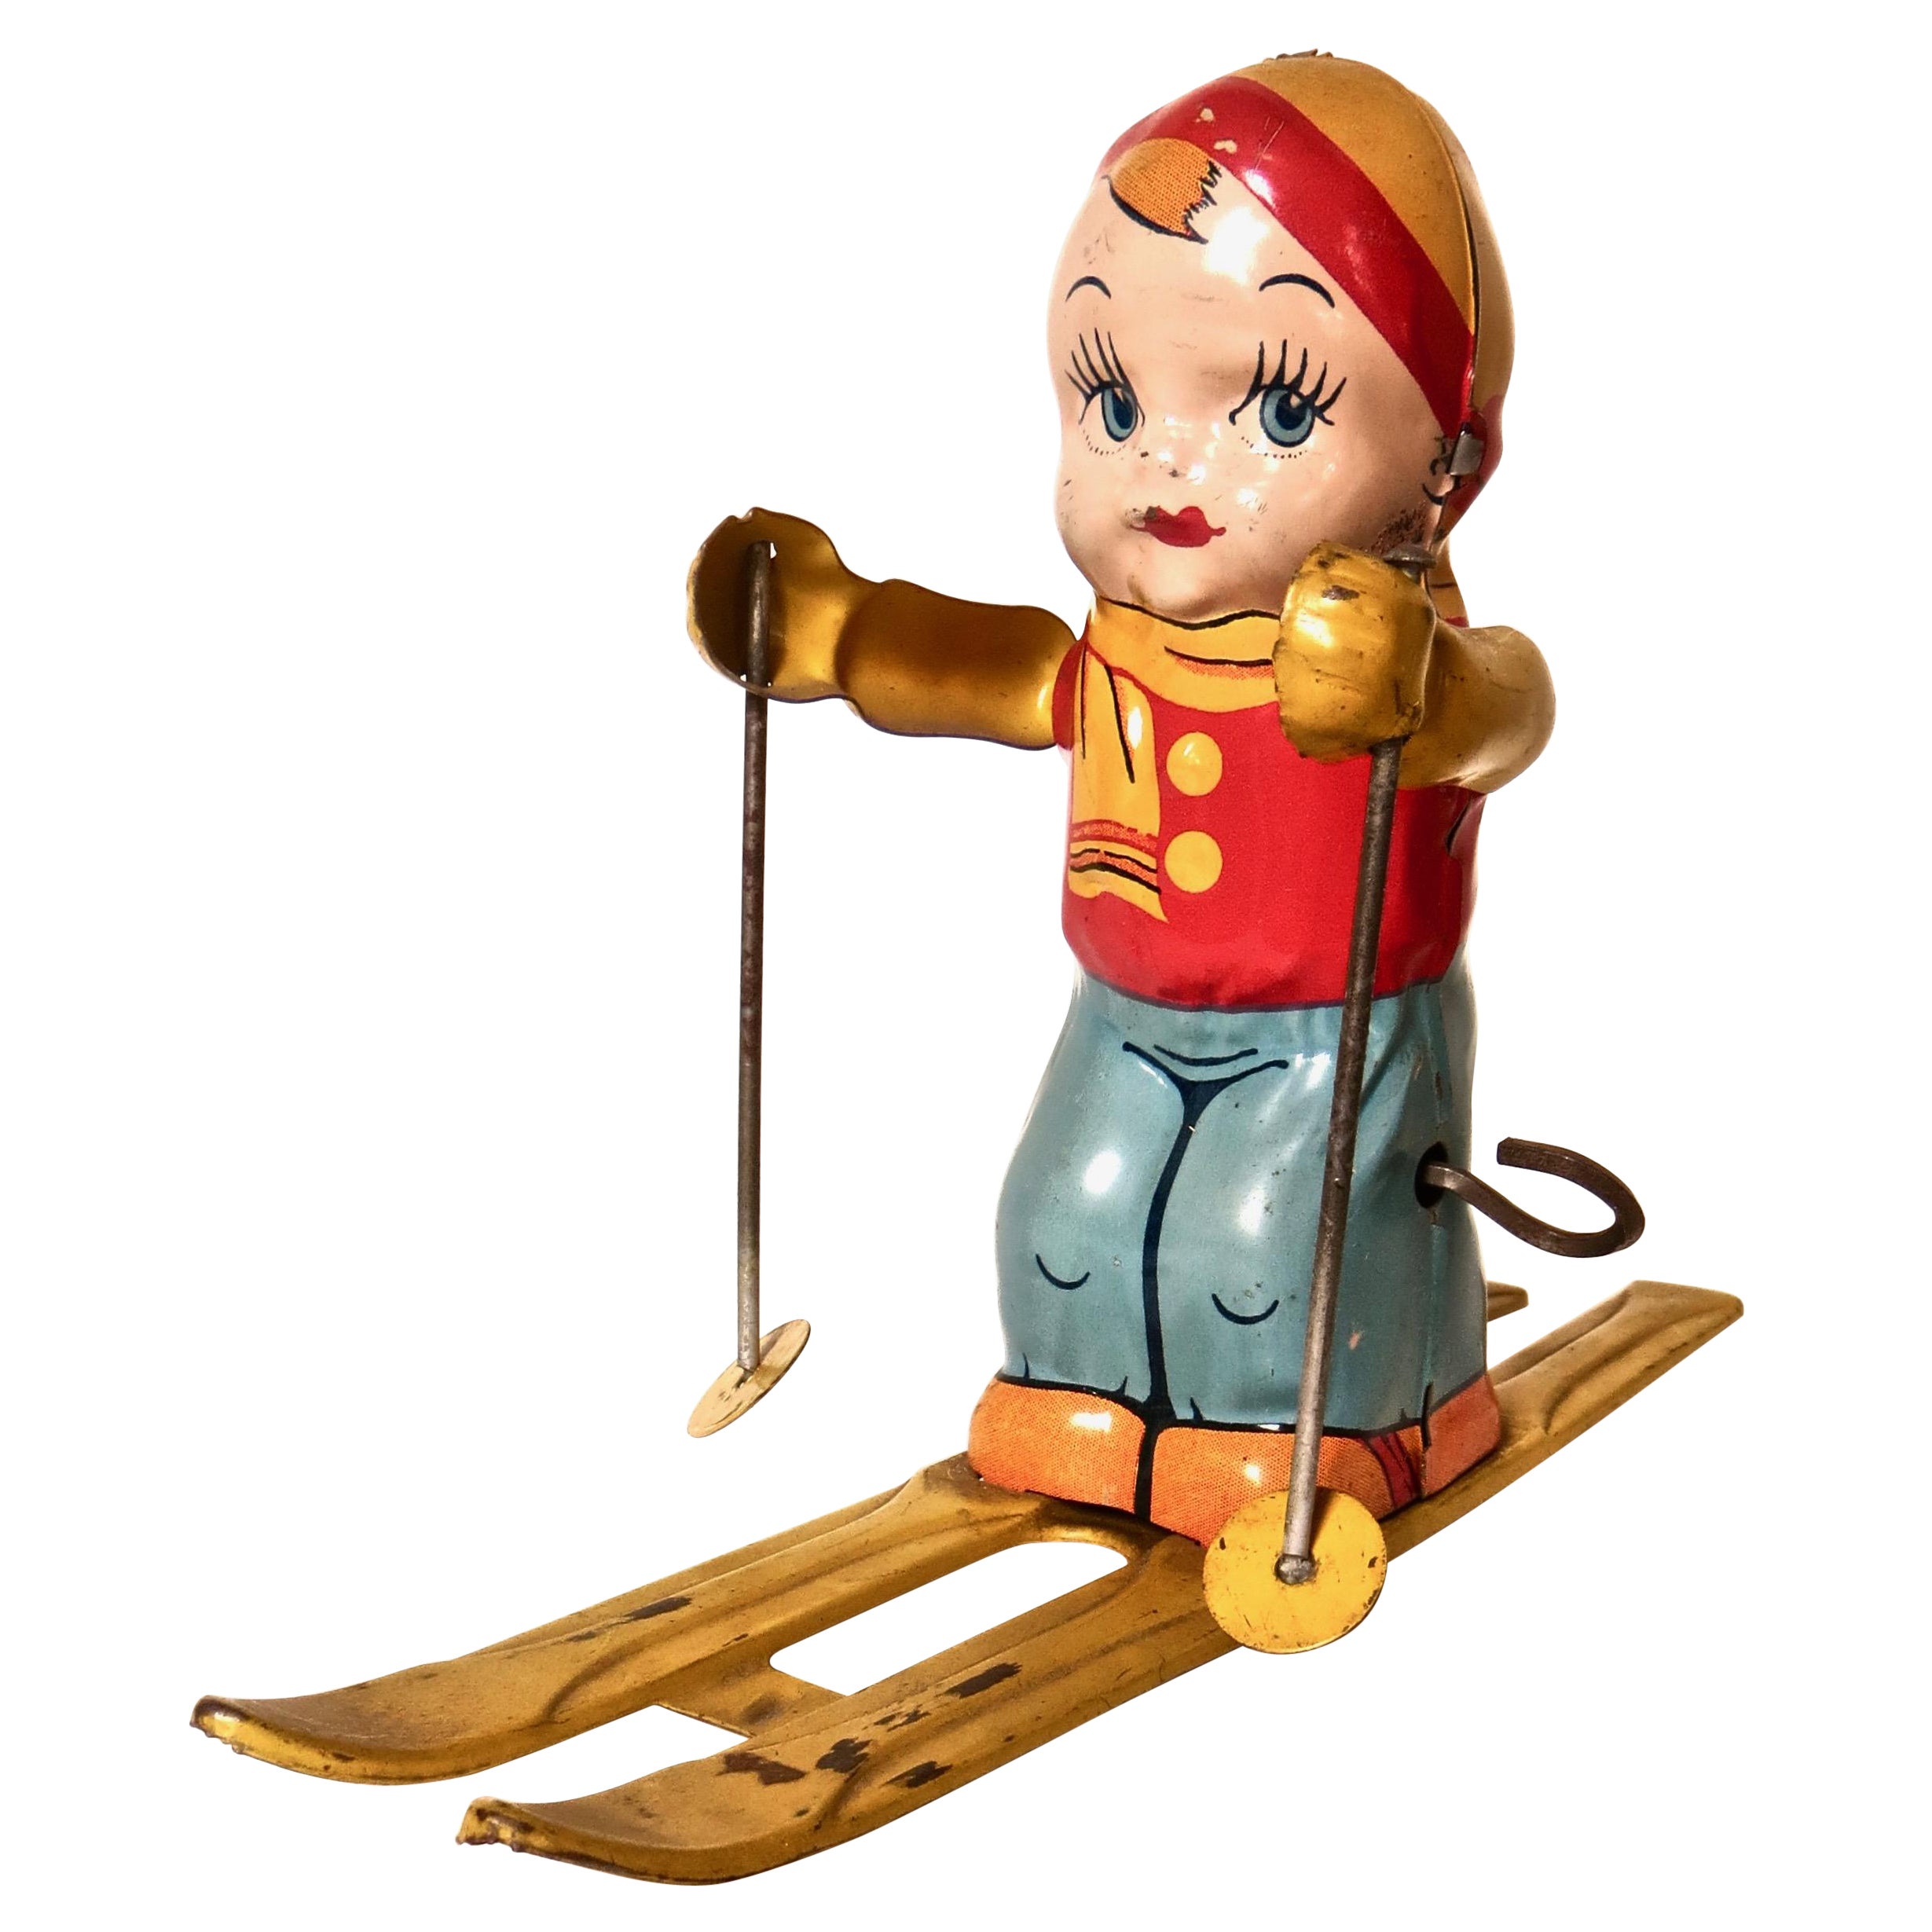 Vintage Tin Wind Up Toy "Boy Skier" by J. Chein & Co. American Circa 1950 For Sale